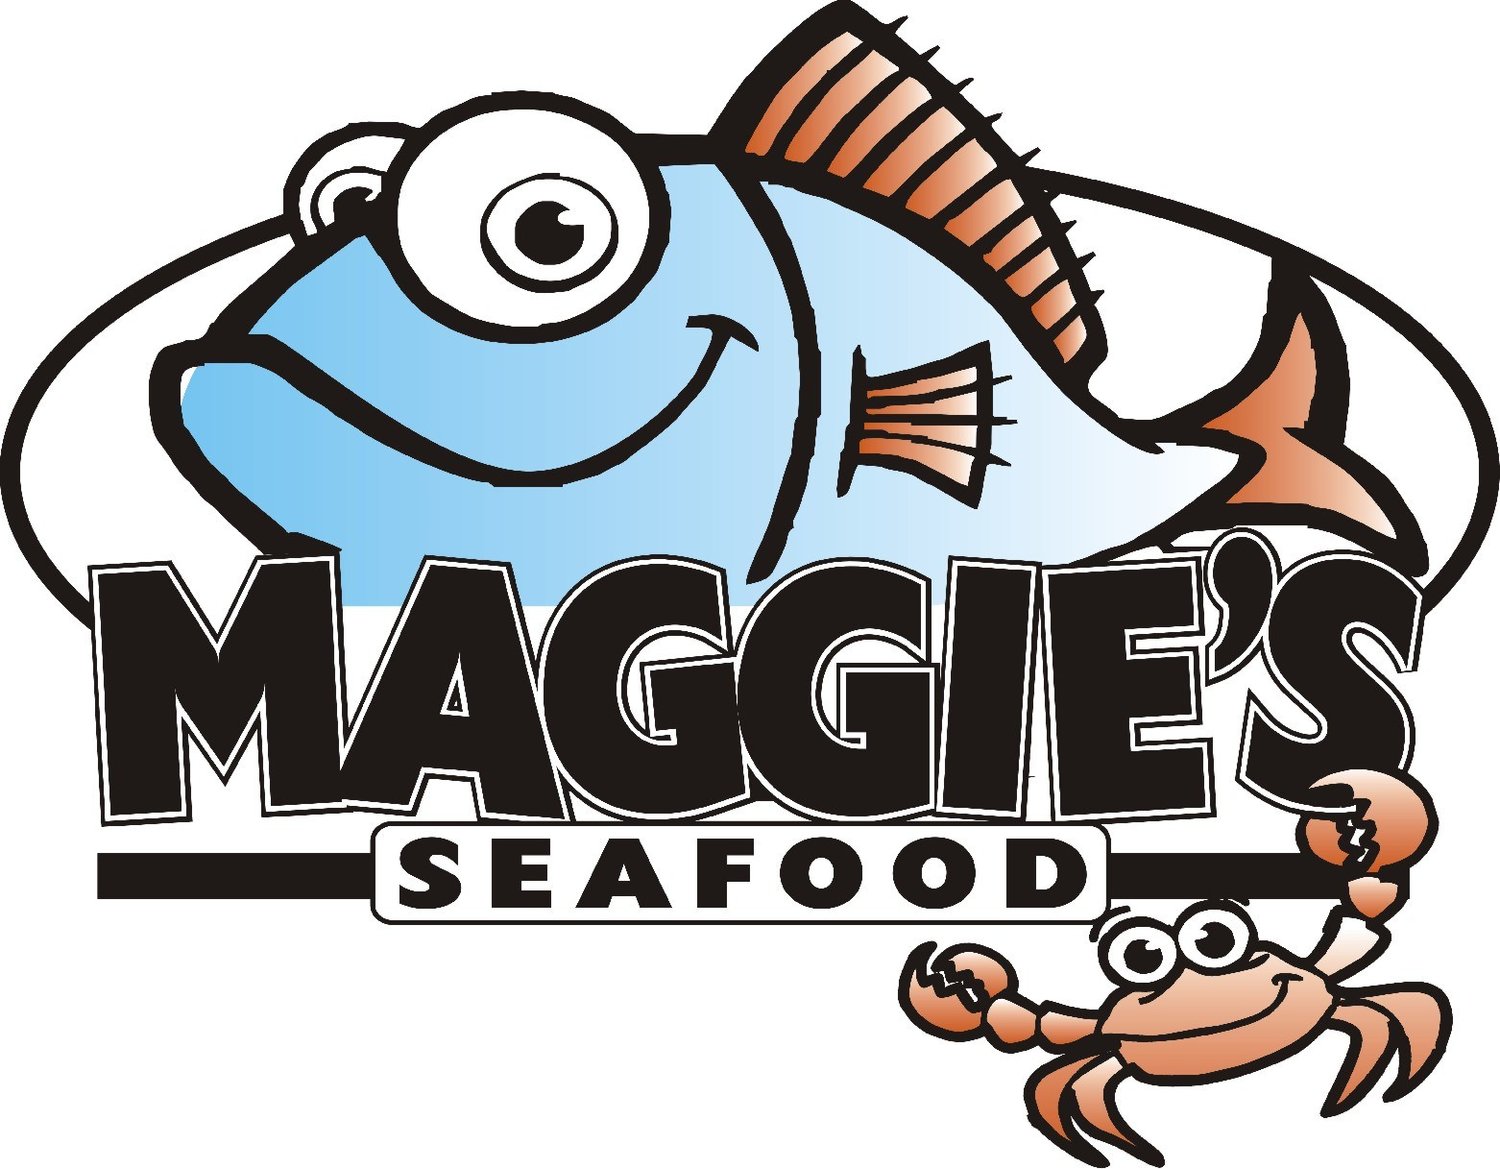 Maggie's Seafood